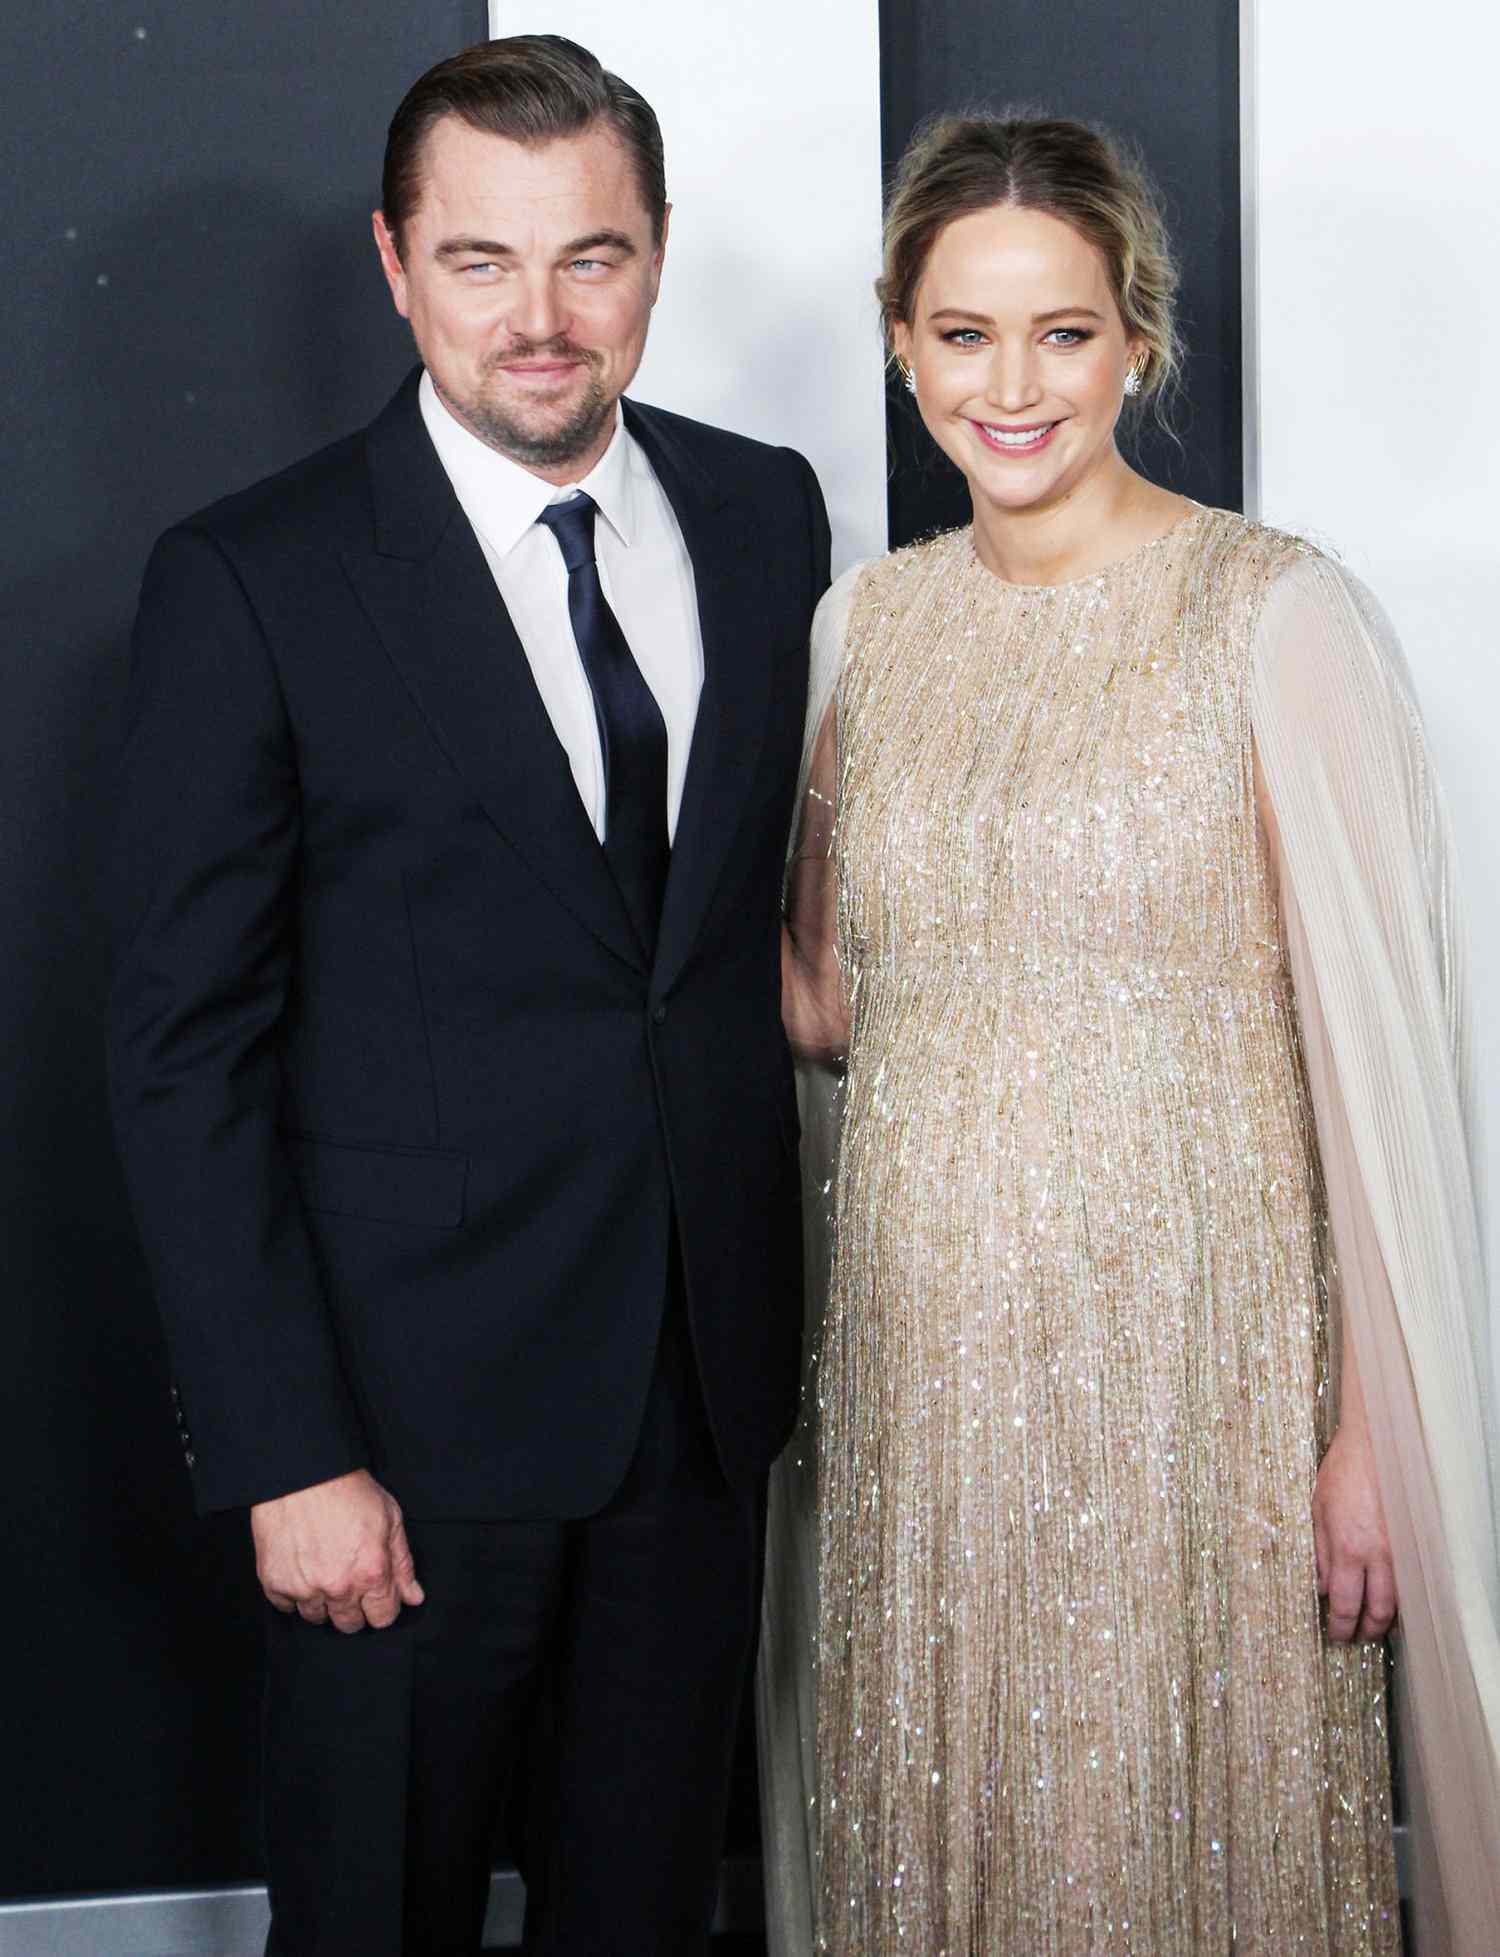 Actor Leonardo DiCaprio and actress Jennifer Lawrence arrive at the World Premiere of Netflix's 'Don't Look Up' held at Jazz at Lincoln Center on December 5, 2021 in Manhattan, New York City, New York, United States. World Premiere of Netflix's 'Don't Look Up', New York City, United States - 06 Dec 2021